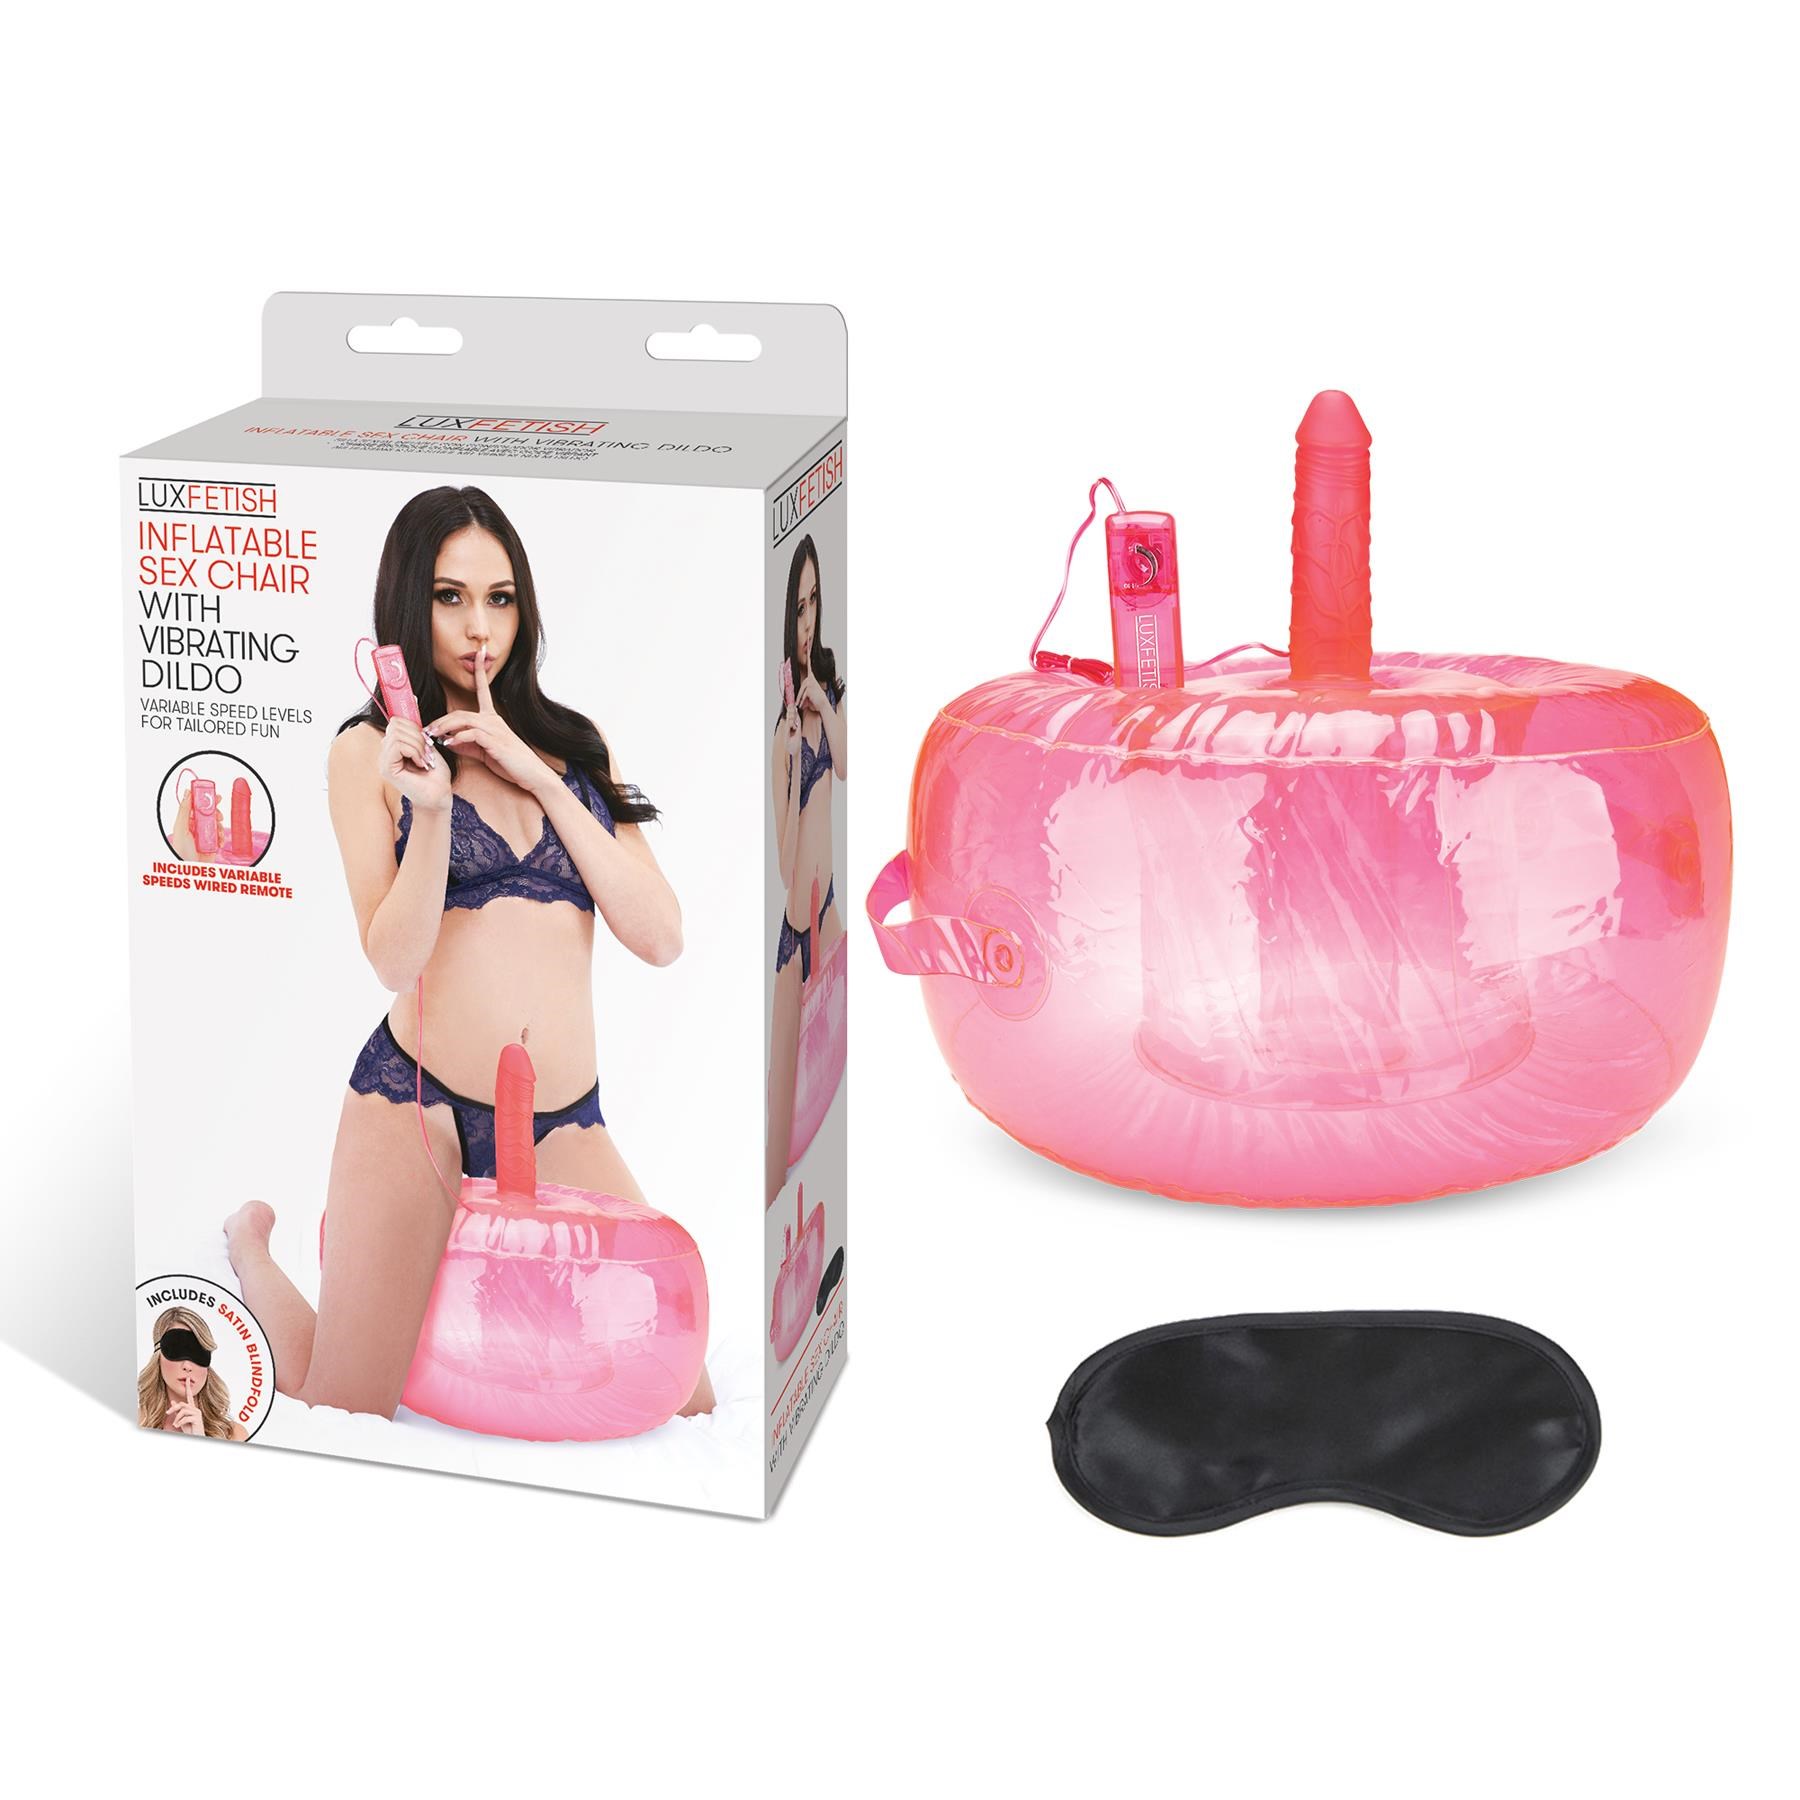 Lux Fetish Inflatable Sex Chair With Vibrating Dildo- Product and Packaging